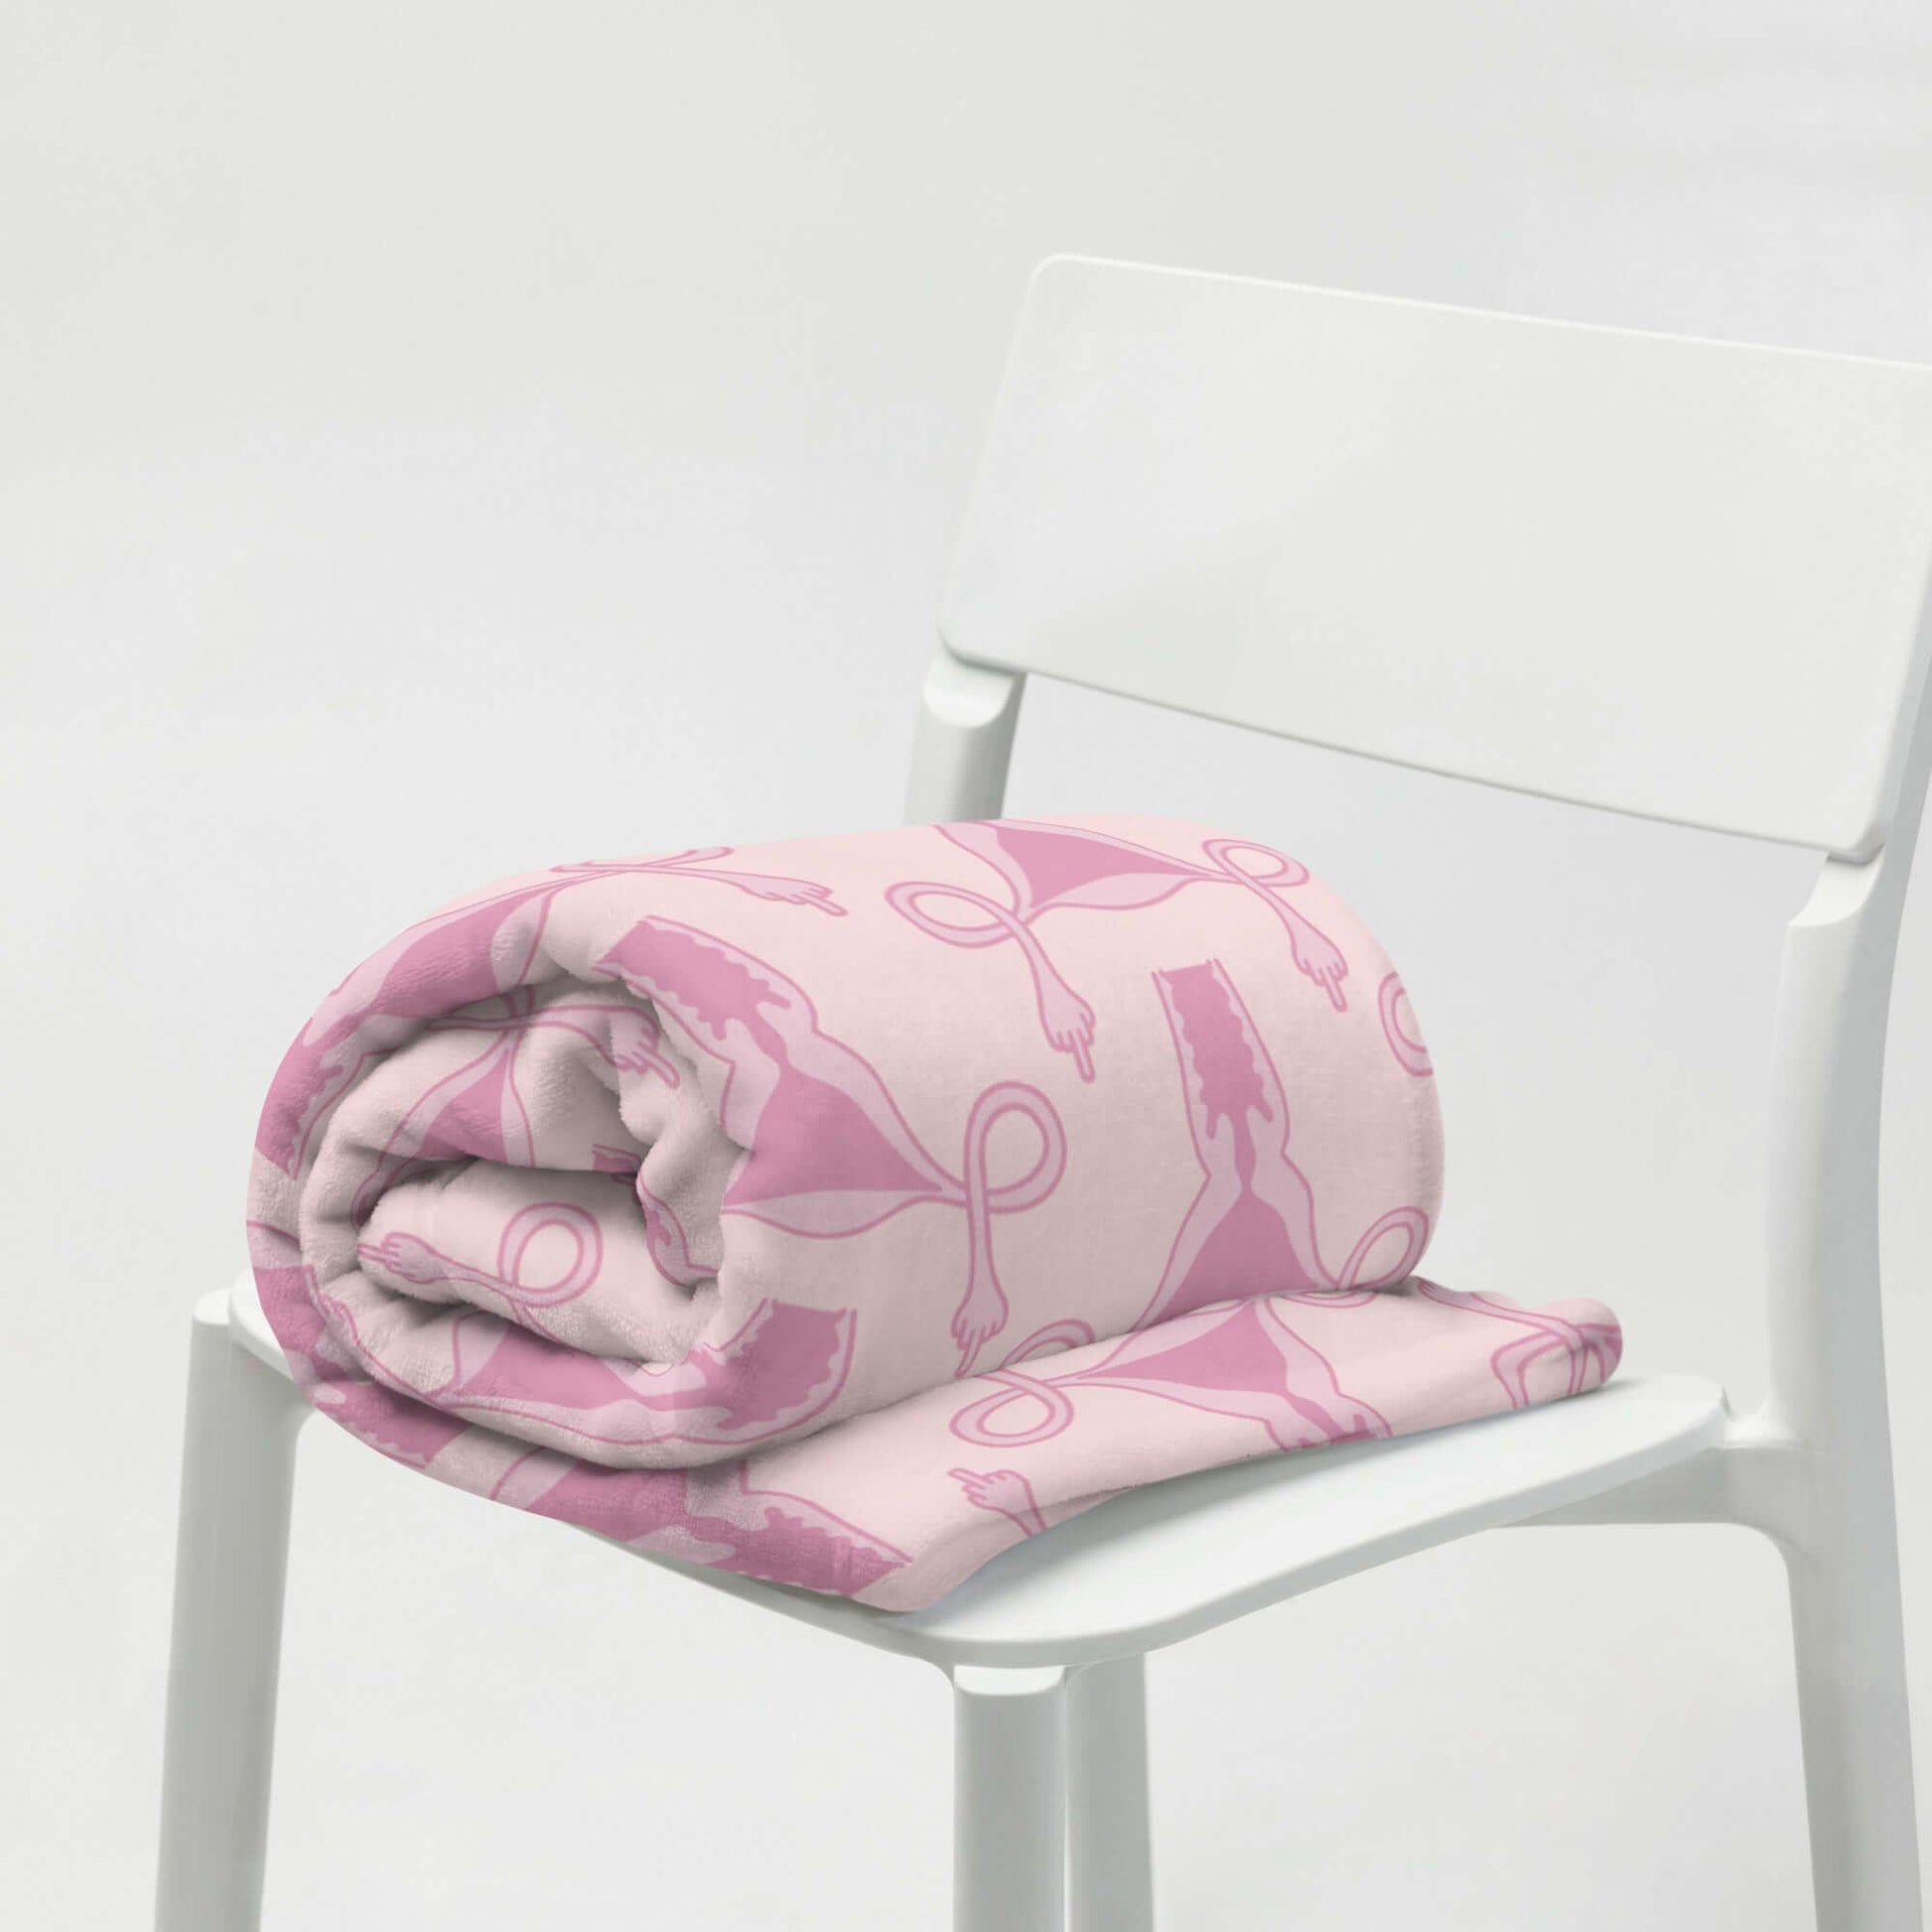 Rolled Pink fleece throw blanket with pink uterus flipping middle finger graphic printed all over.